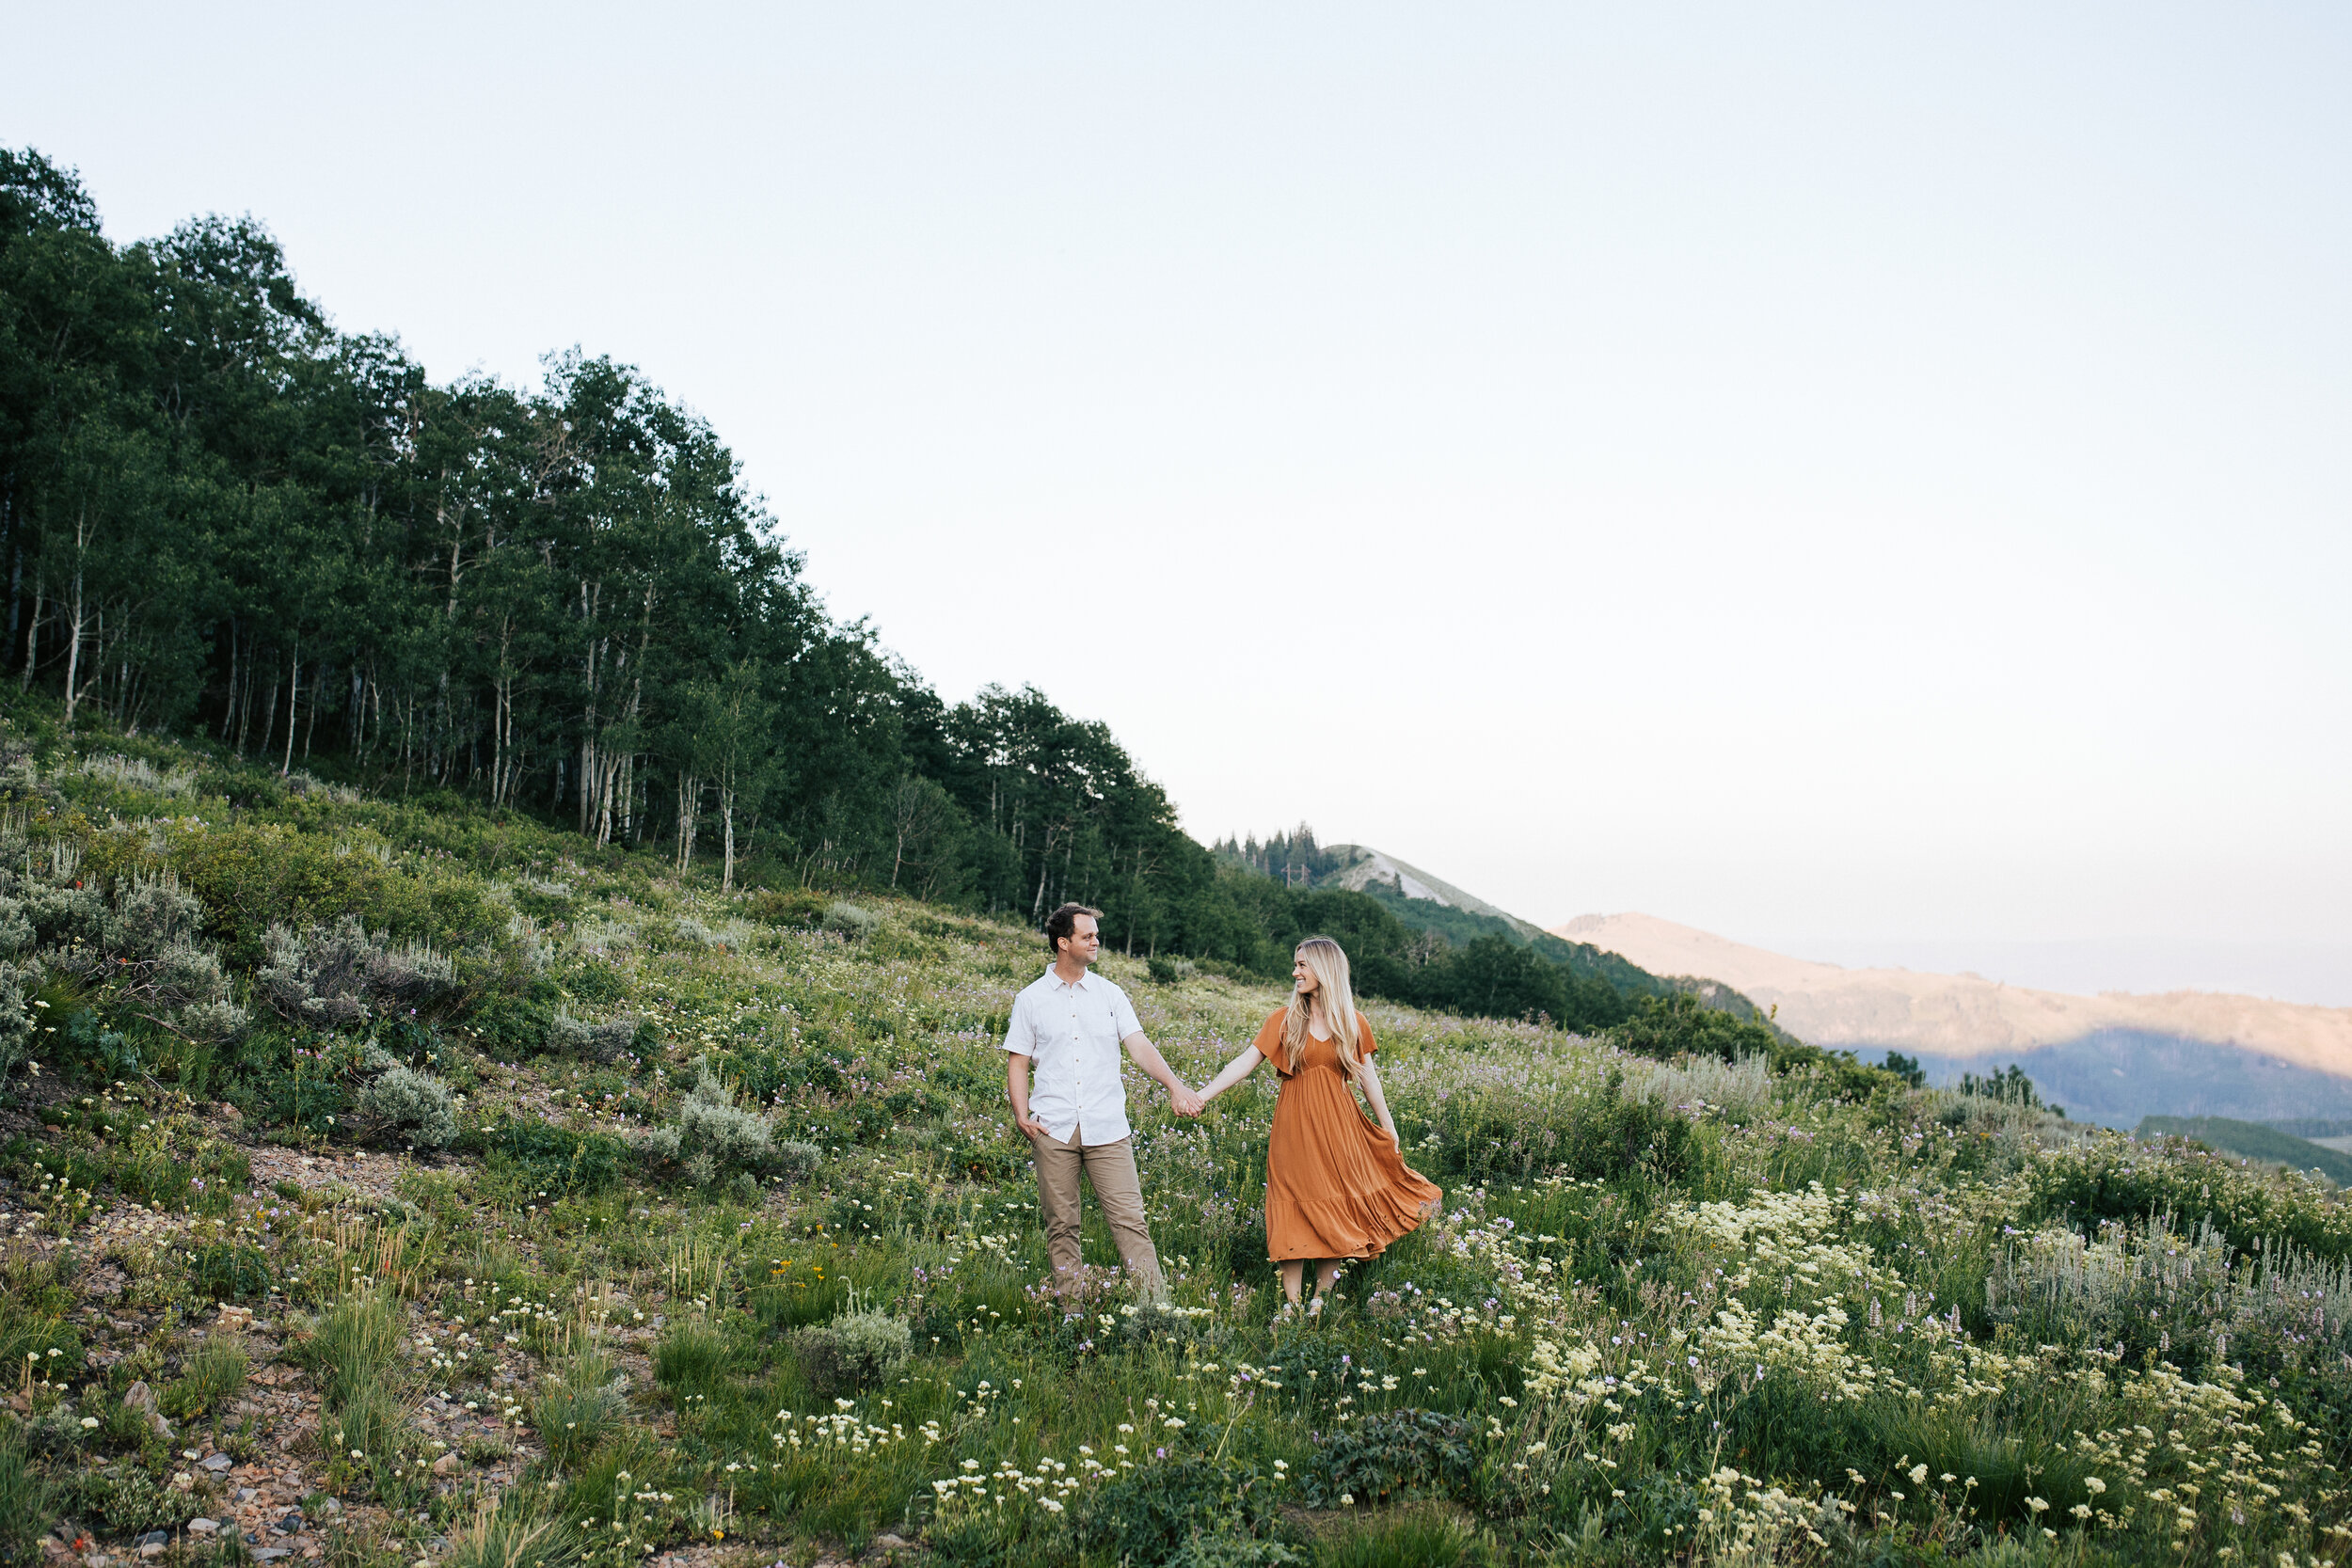  Engagement session in wildflowers in the mountains near Park City, Utah. Summertime engagement photos with mountain views. Engaged couple in the mountains. Outfit inspo. Engagement outfits. #engagementphotos #engagements #weddingphotographer #photog